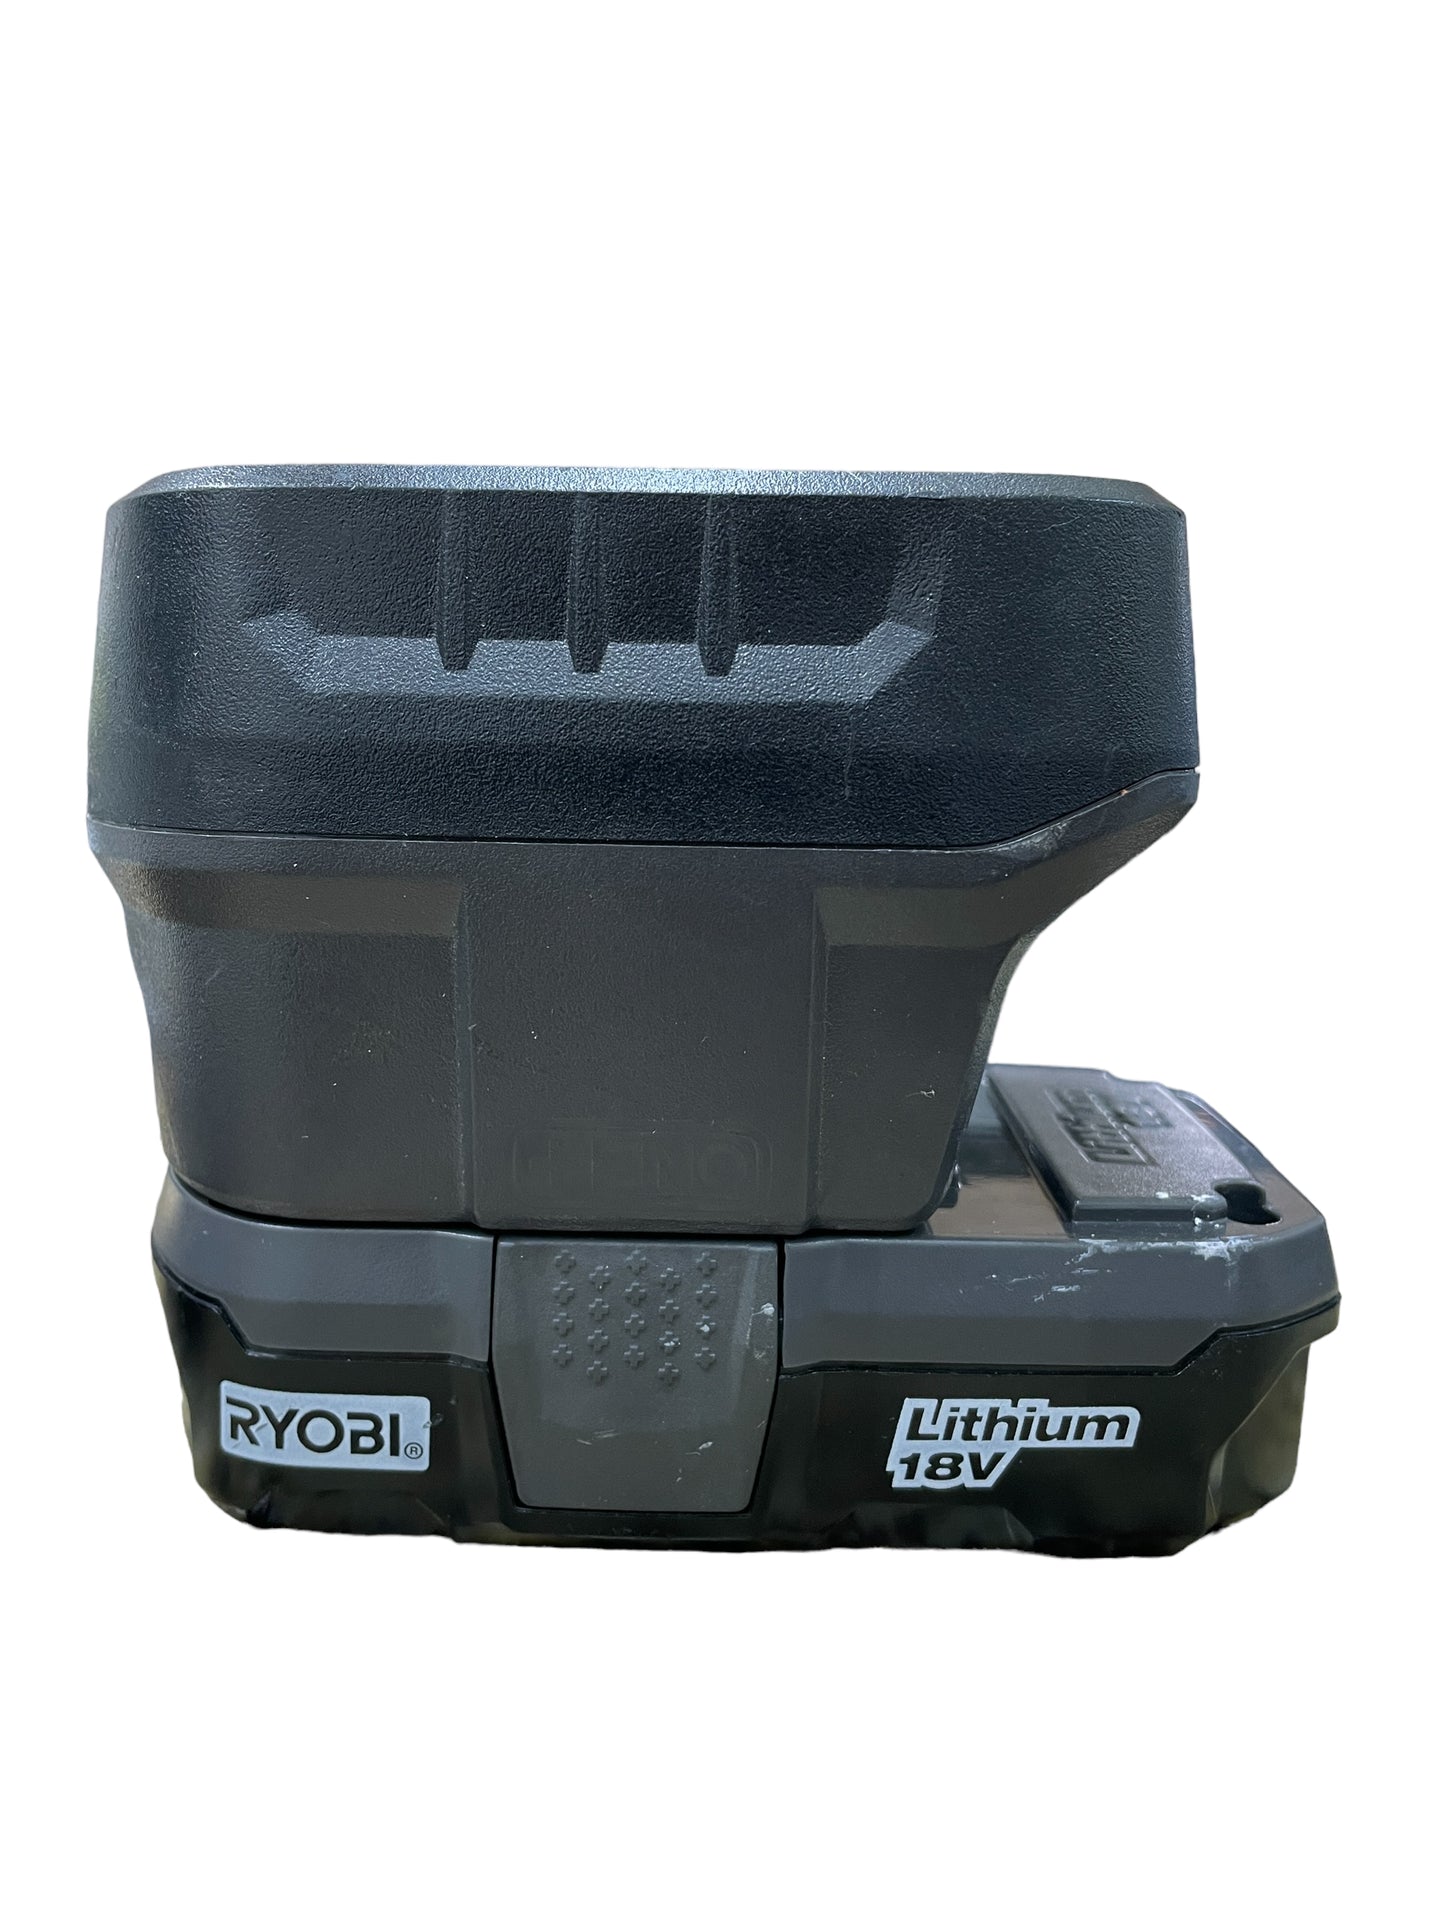 Ryobi P118B 18V Battery Charger and Battery